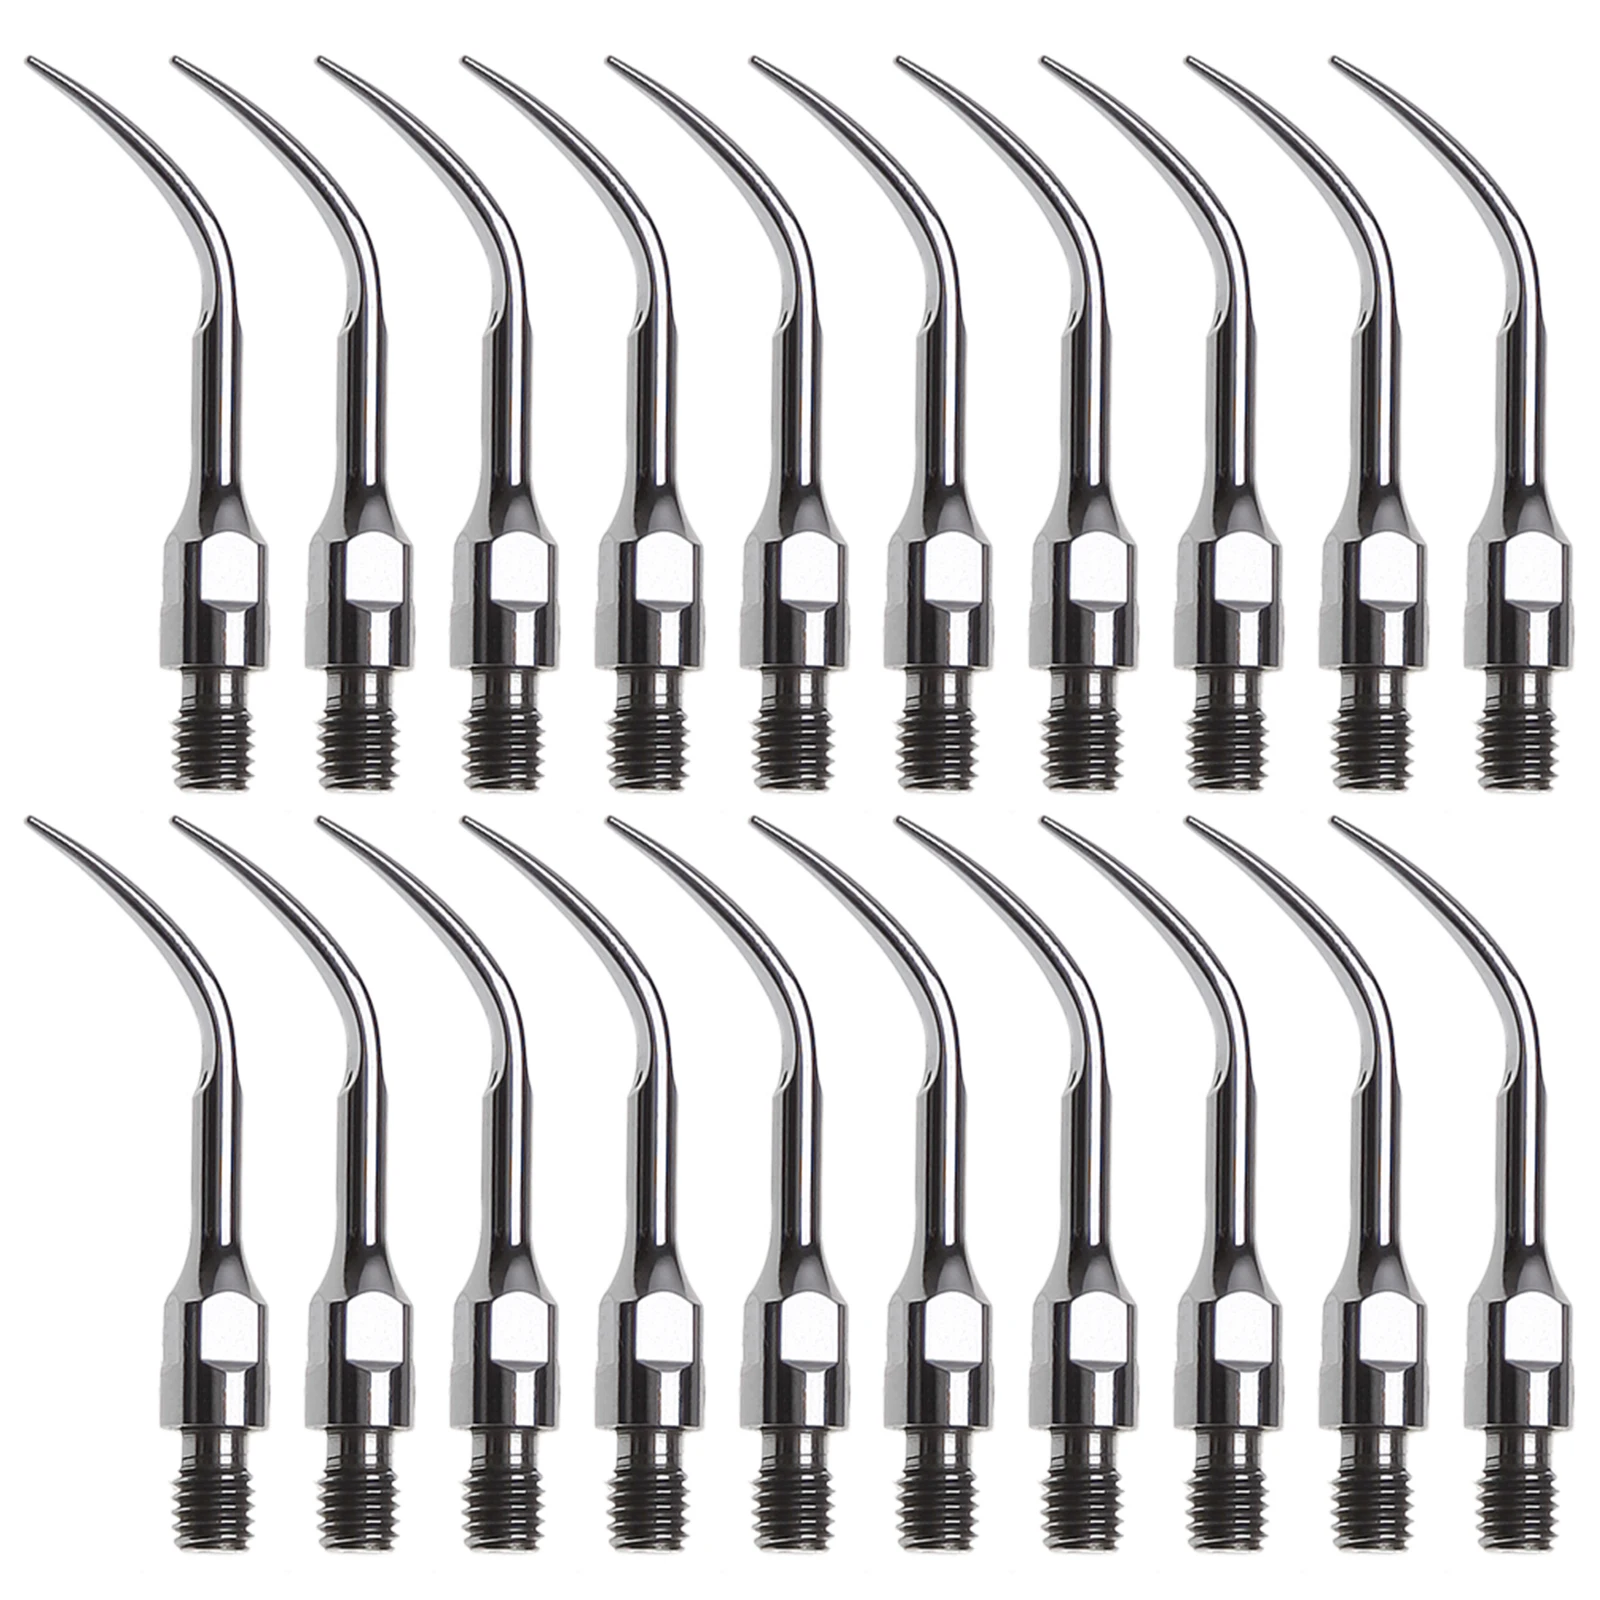 20pcs High quality SIRONA style Dental Ultrasonic Tips Scaler Scaling Endo Perio  GS4